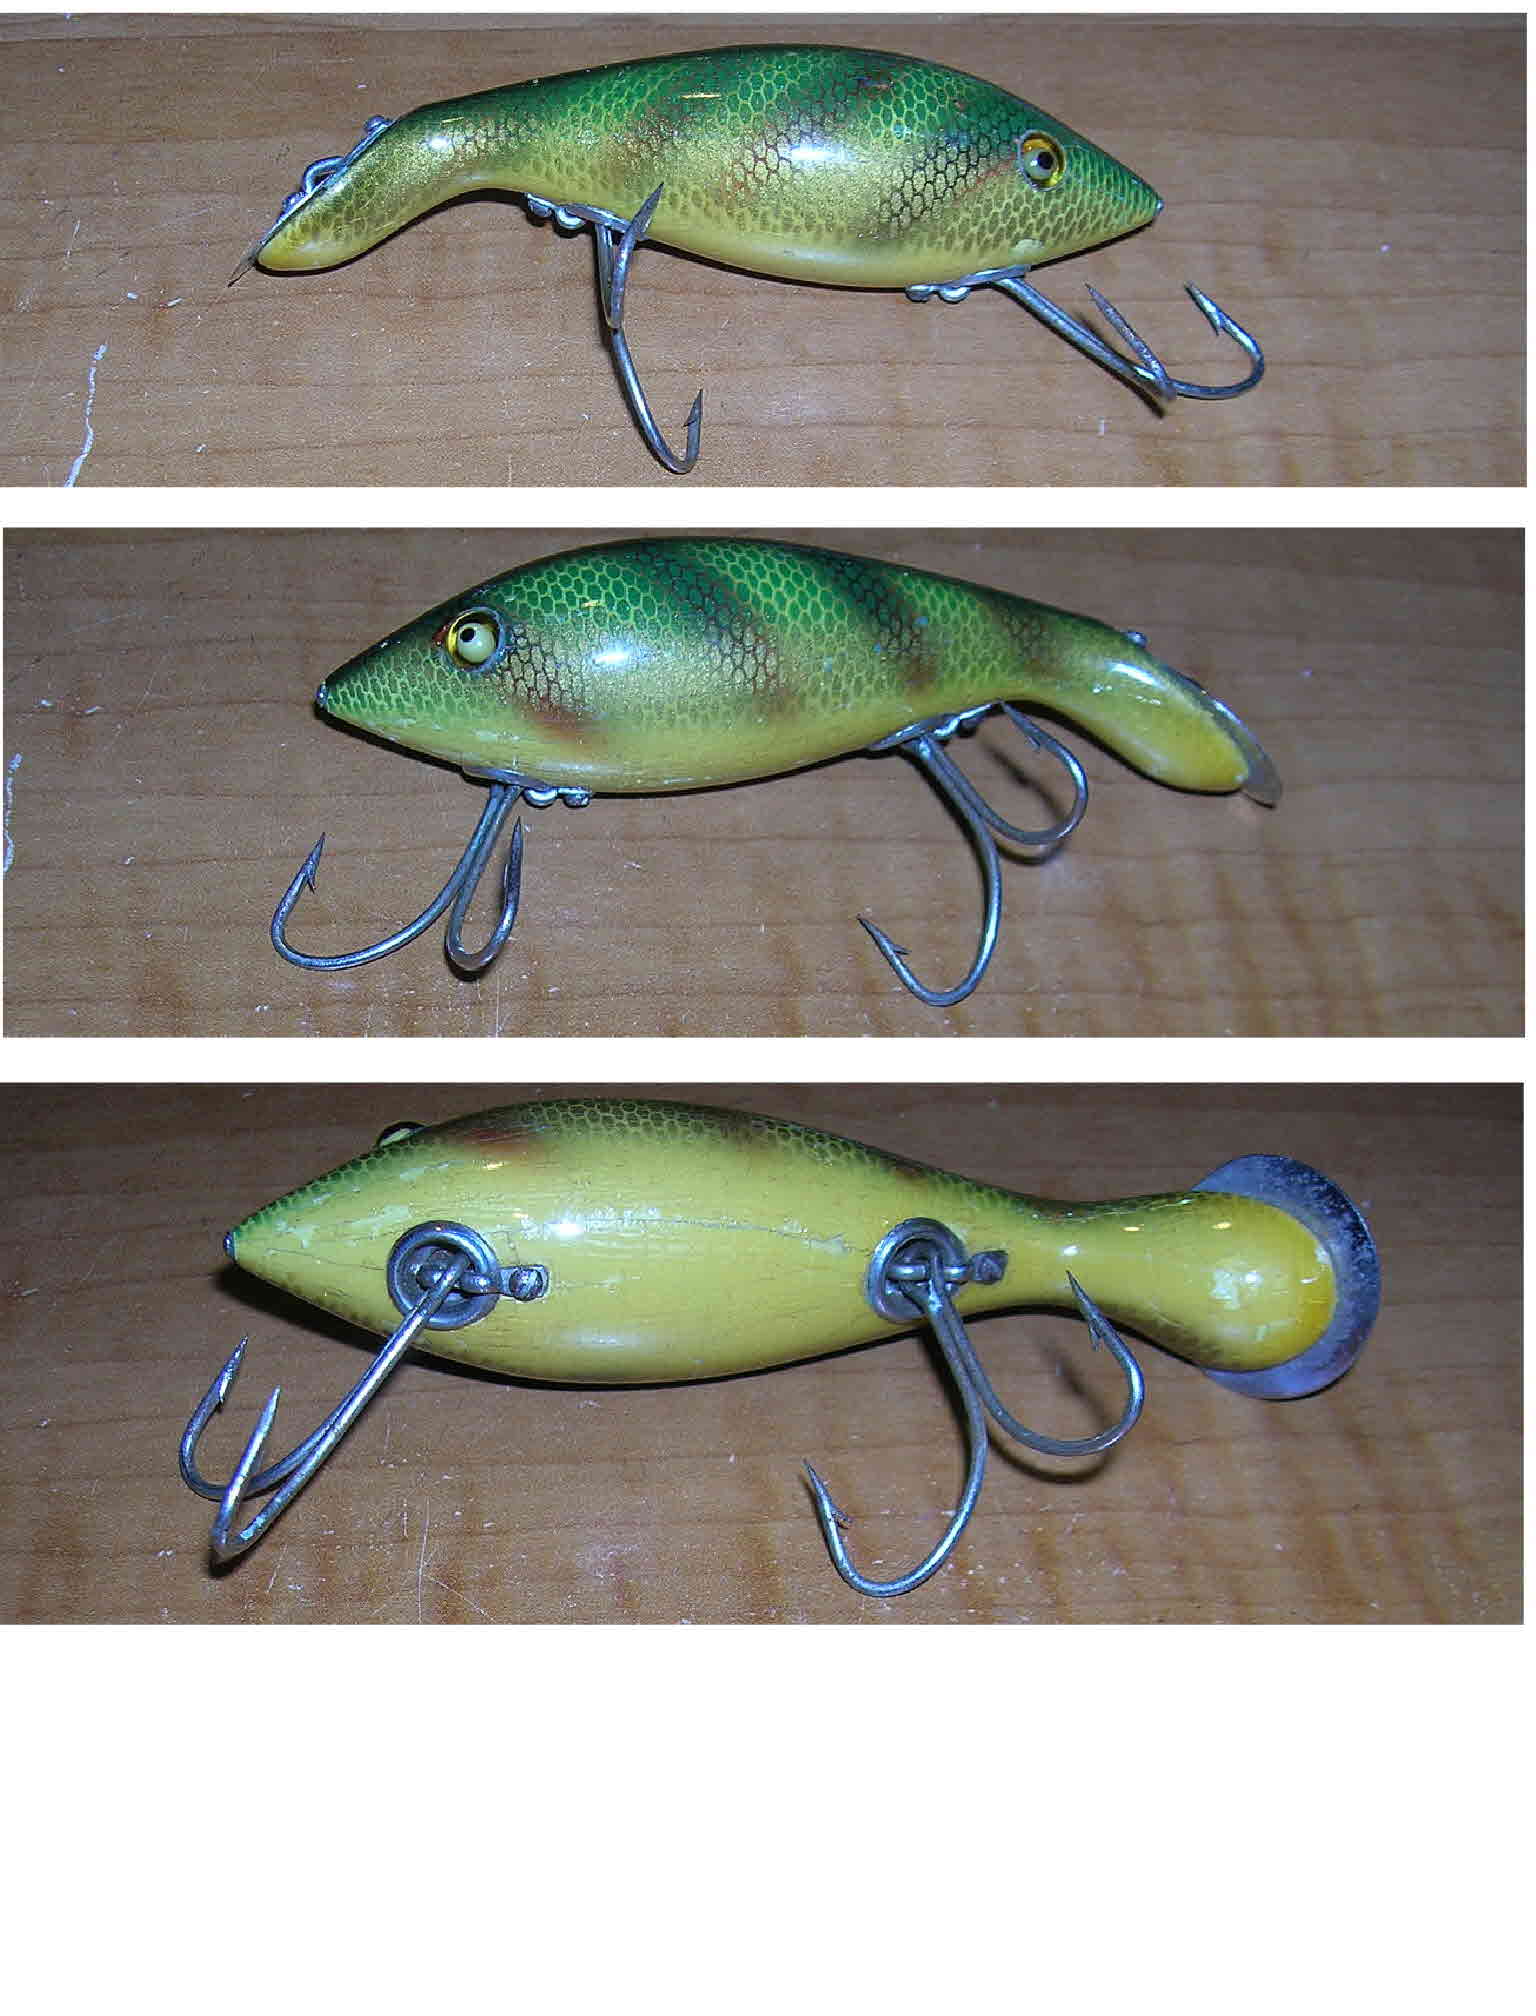 Moonlight 1 Paw Paw BASS Reproduction Lure New in Box W/ Paper 